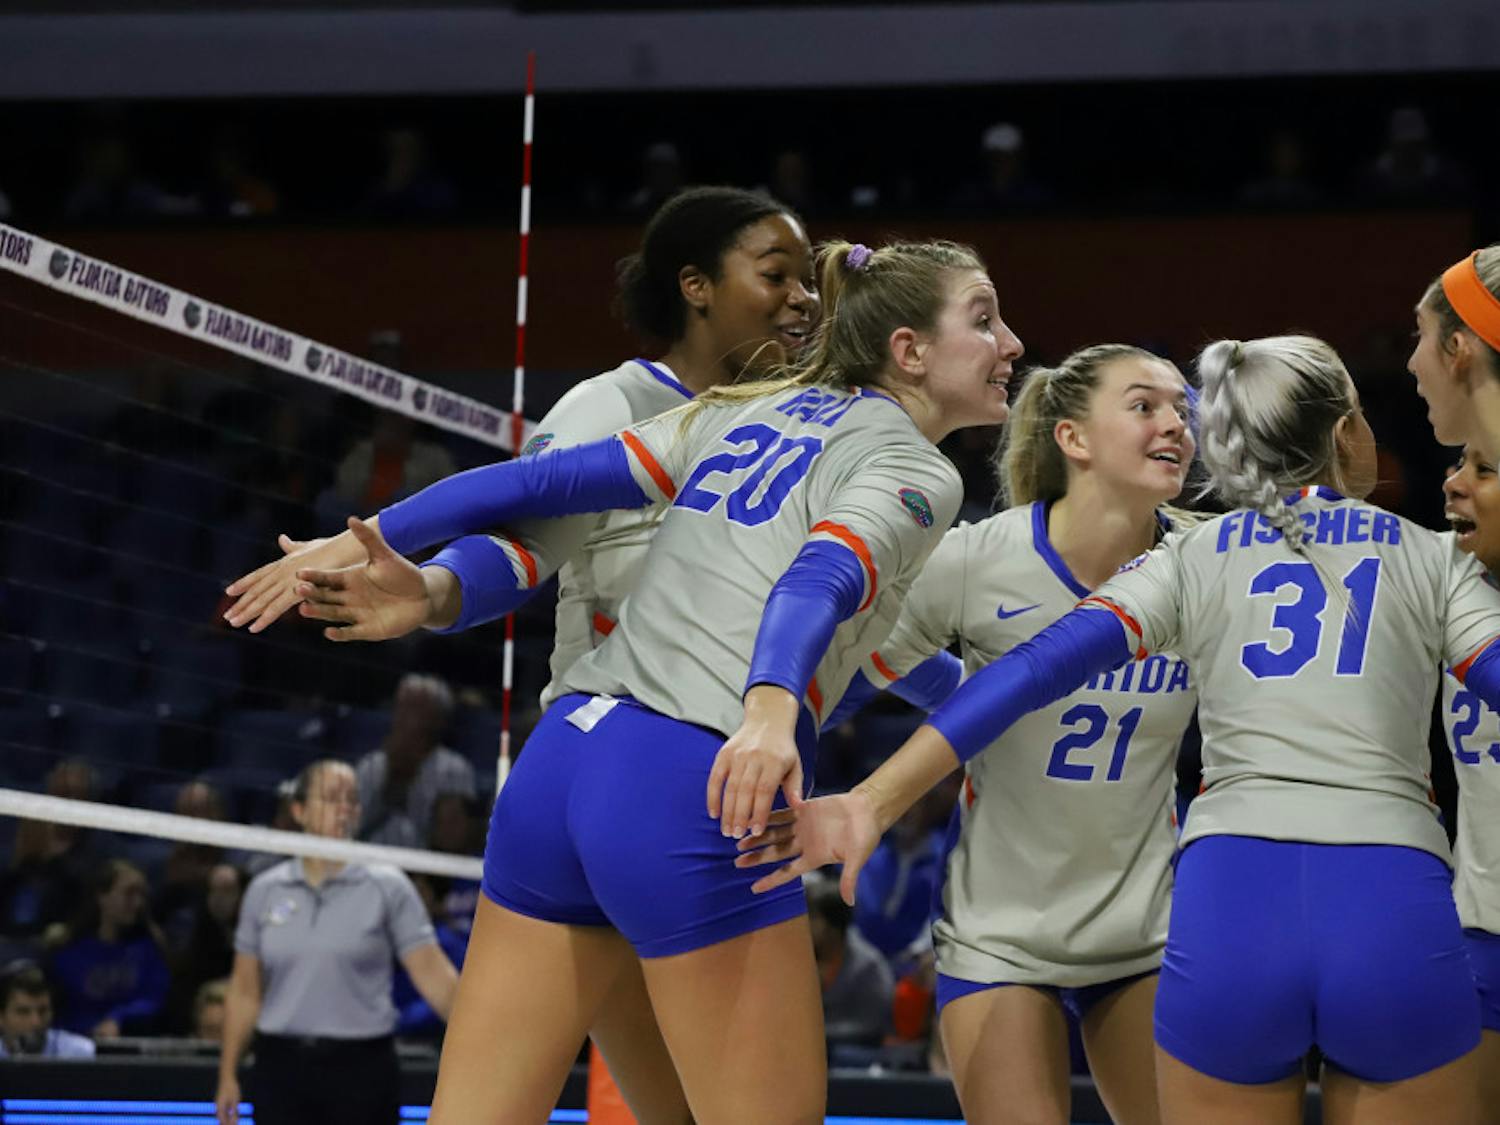 The Gators congregate in a huddle formation at their game against LSU last season. Florida dropped its second match of the season Friday night when it lost to Georgia, 3-1.